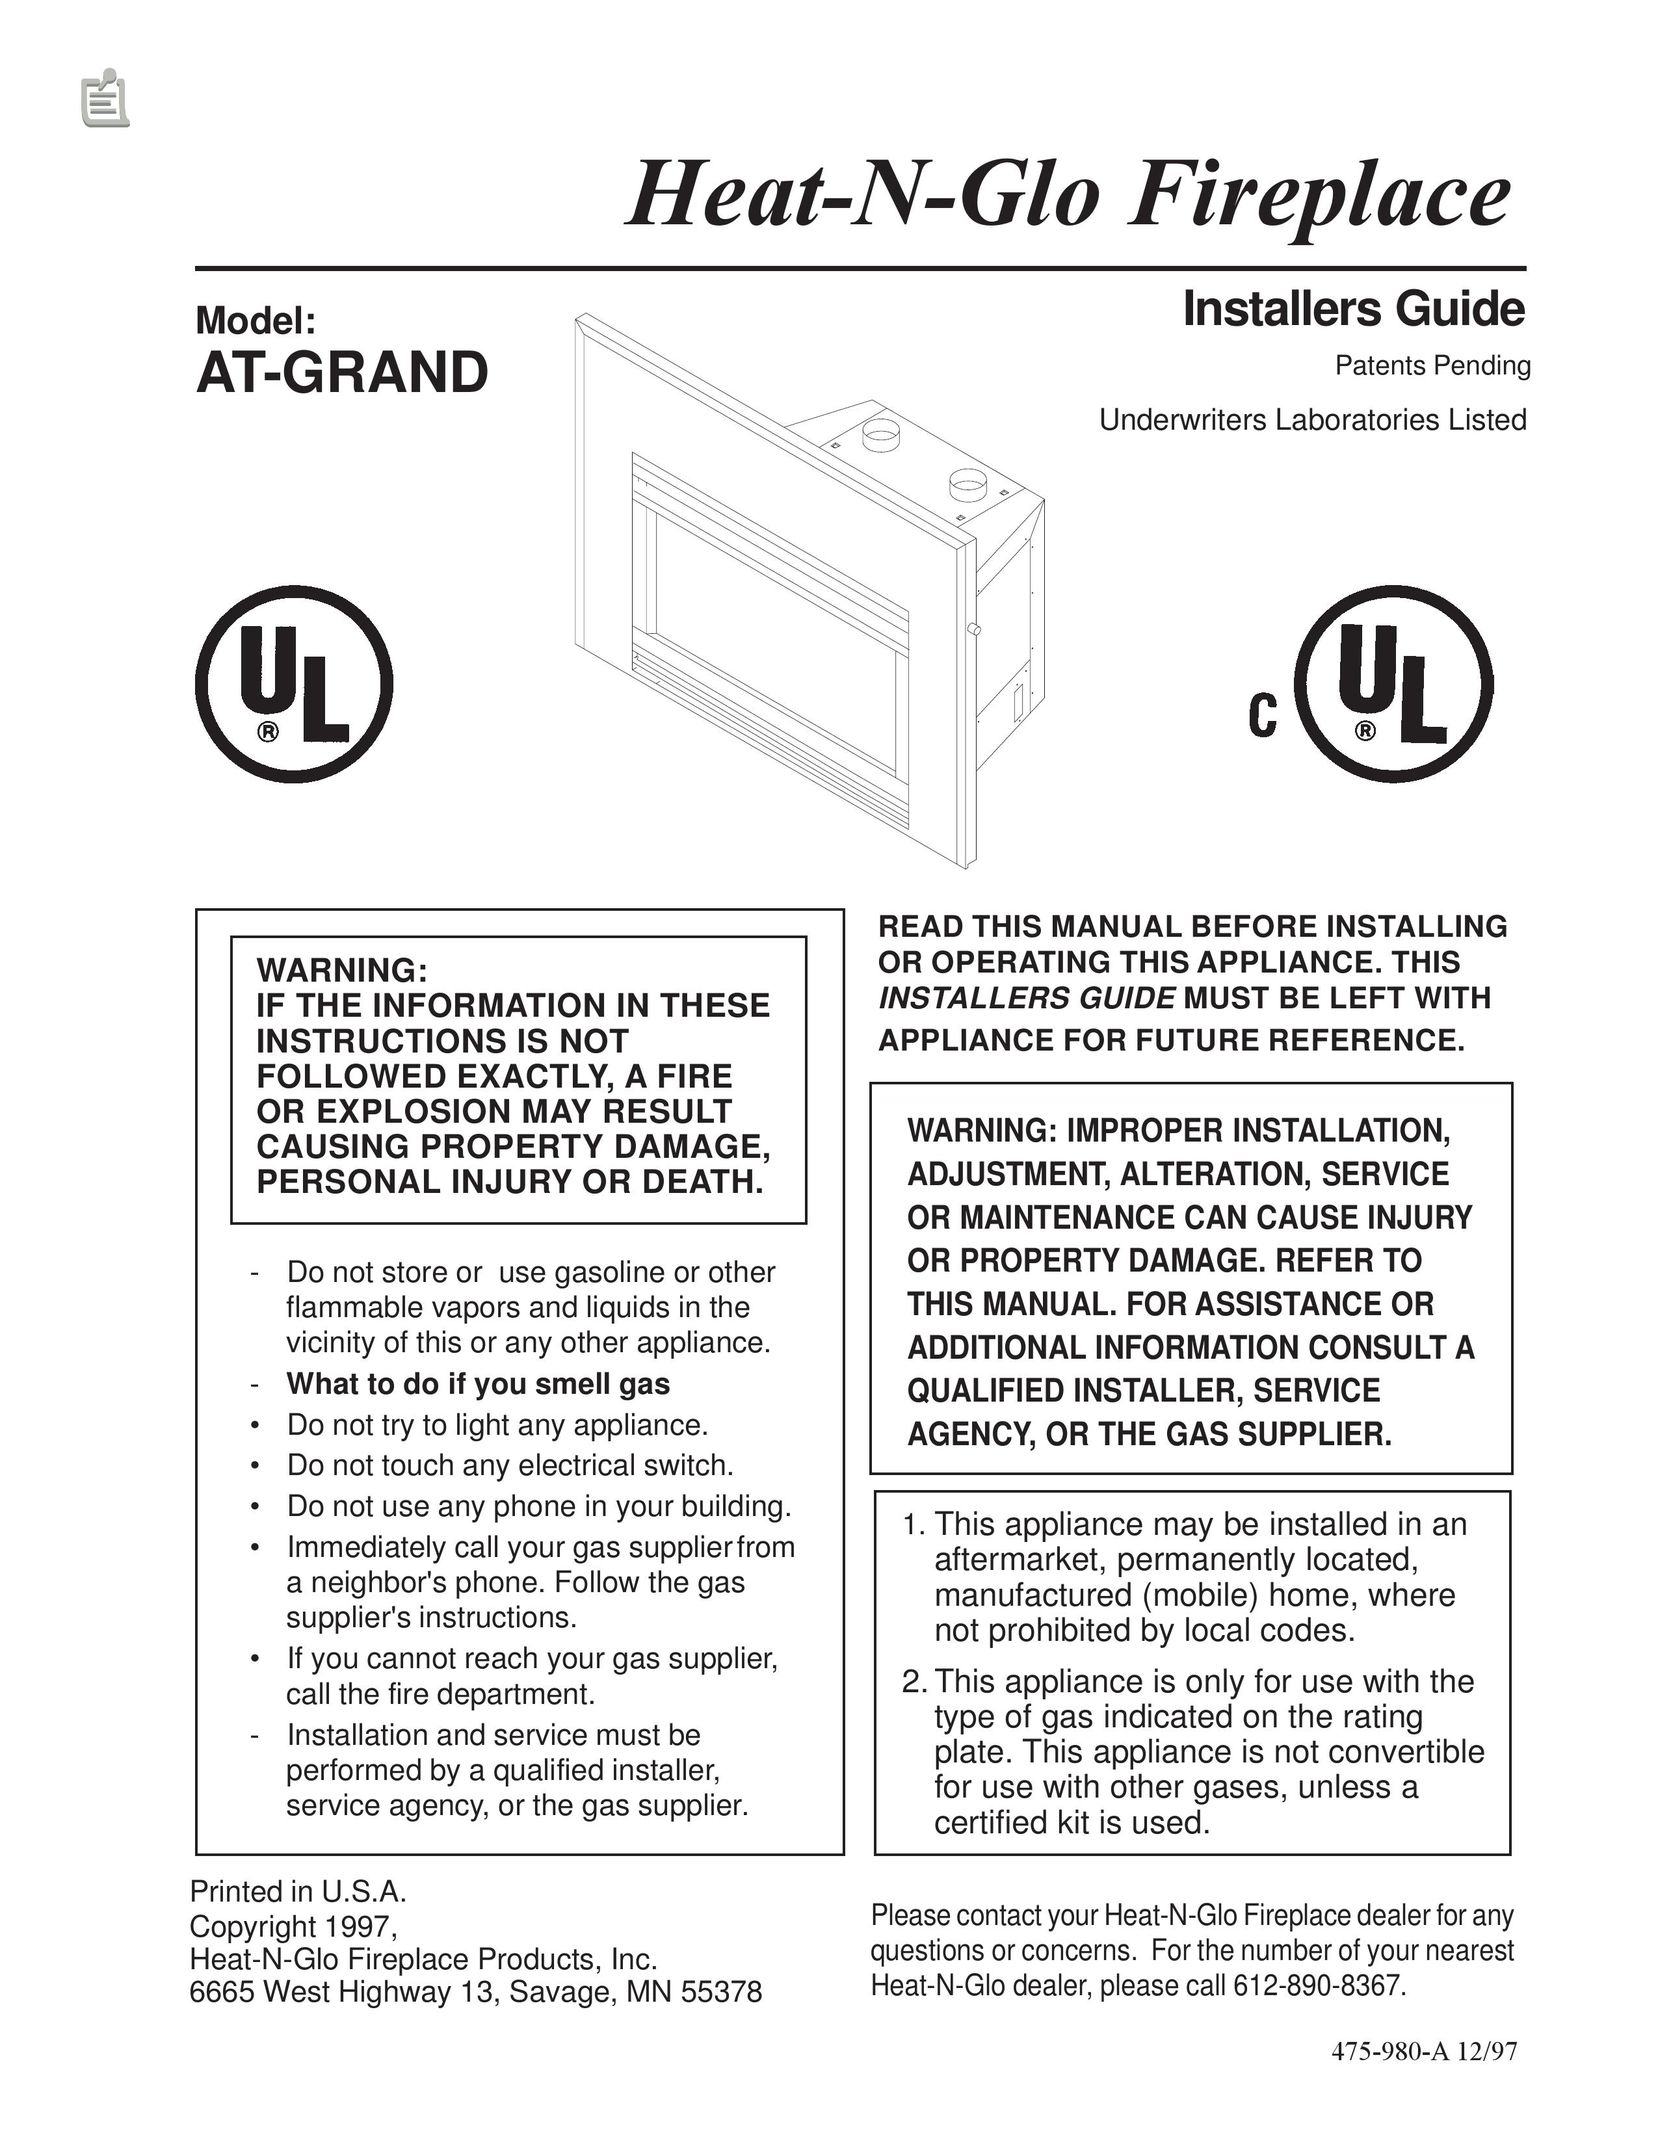 Heat & Glo LifeStyle AT-GRAND Indoor Fireplace User Manual